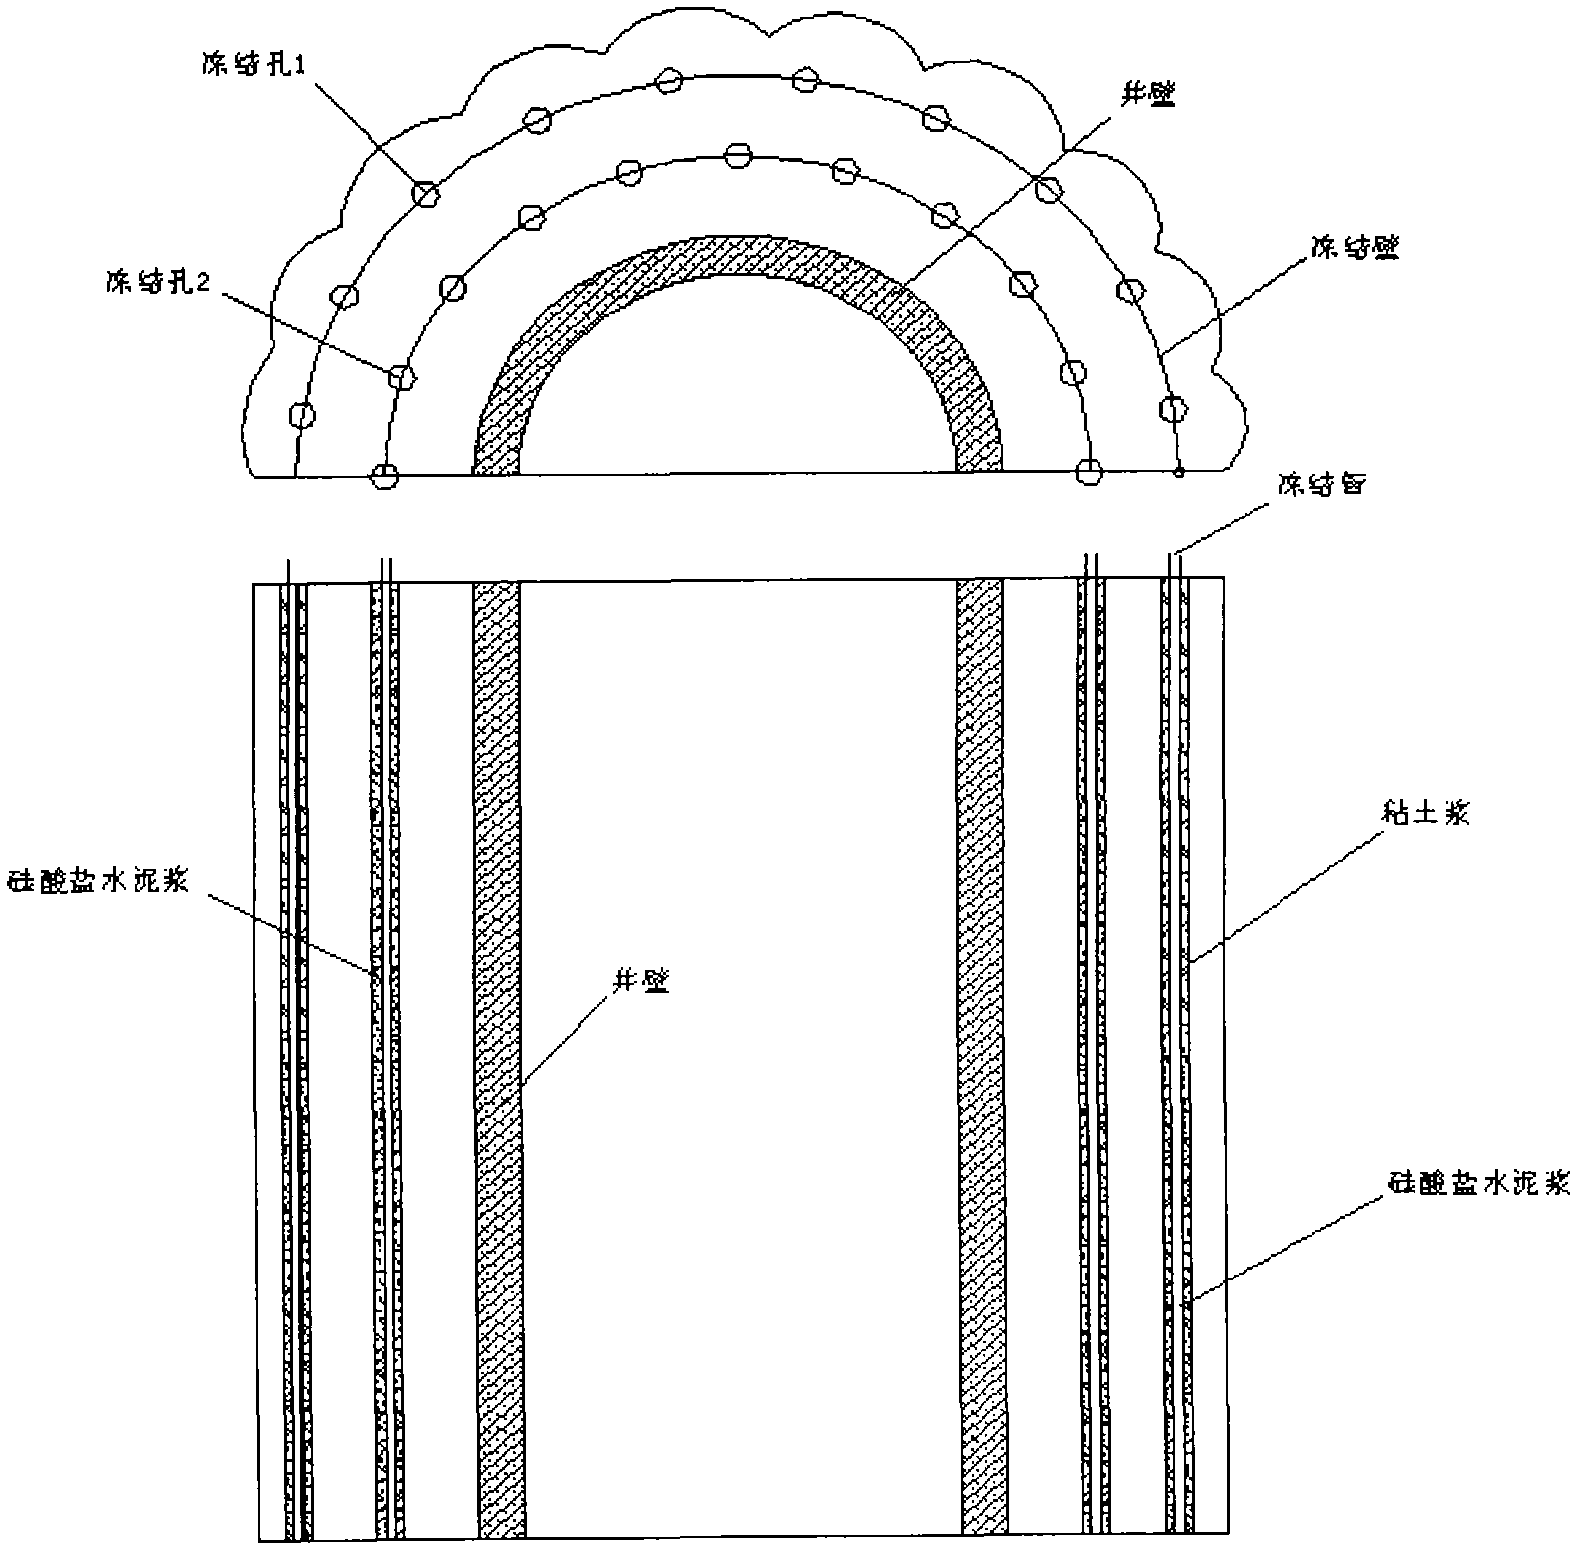 Retarding cement slurry composite for replacement of super-deep freezing hole and preparation method thereof